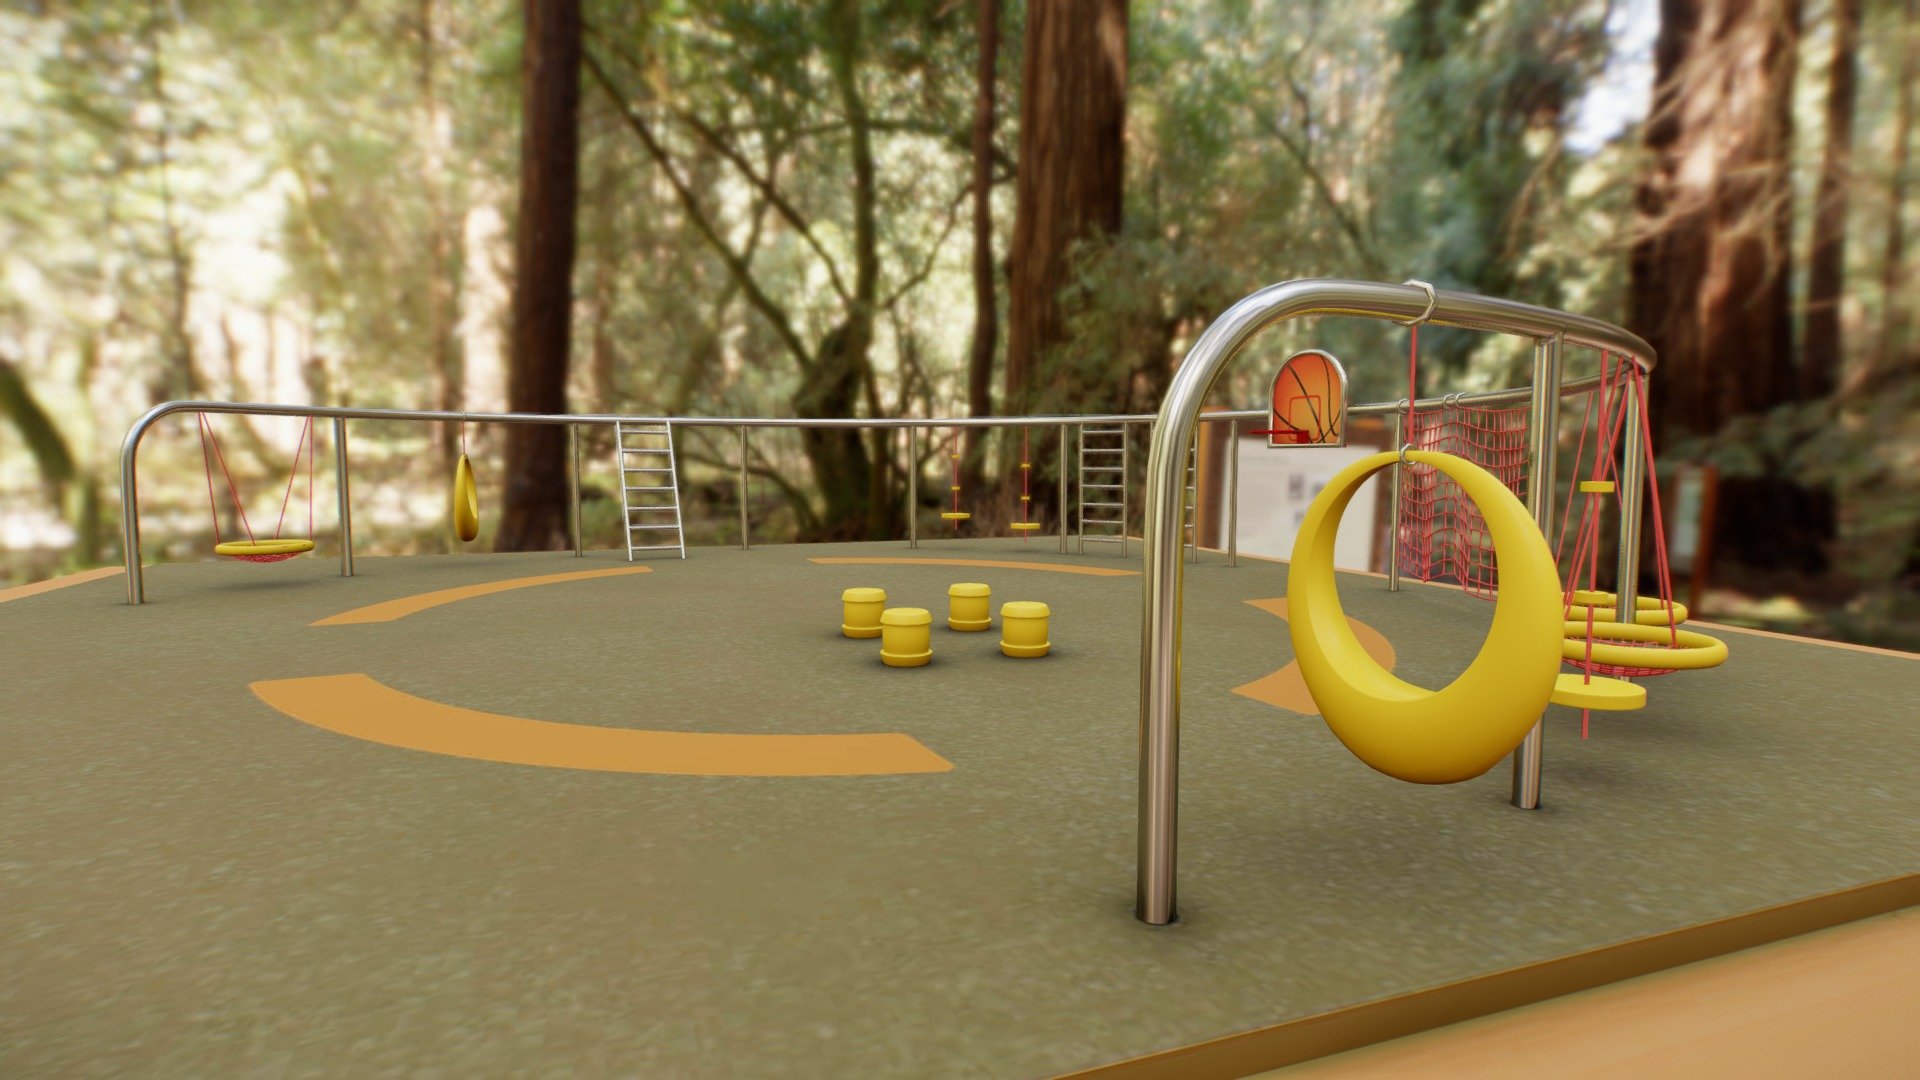 Moders Playground 2023
Blender + Substance painter

My wife's model - Moders Playground 2023 - Buy Royalty Free 3D model by VRA (@architect47) 3d model